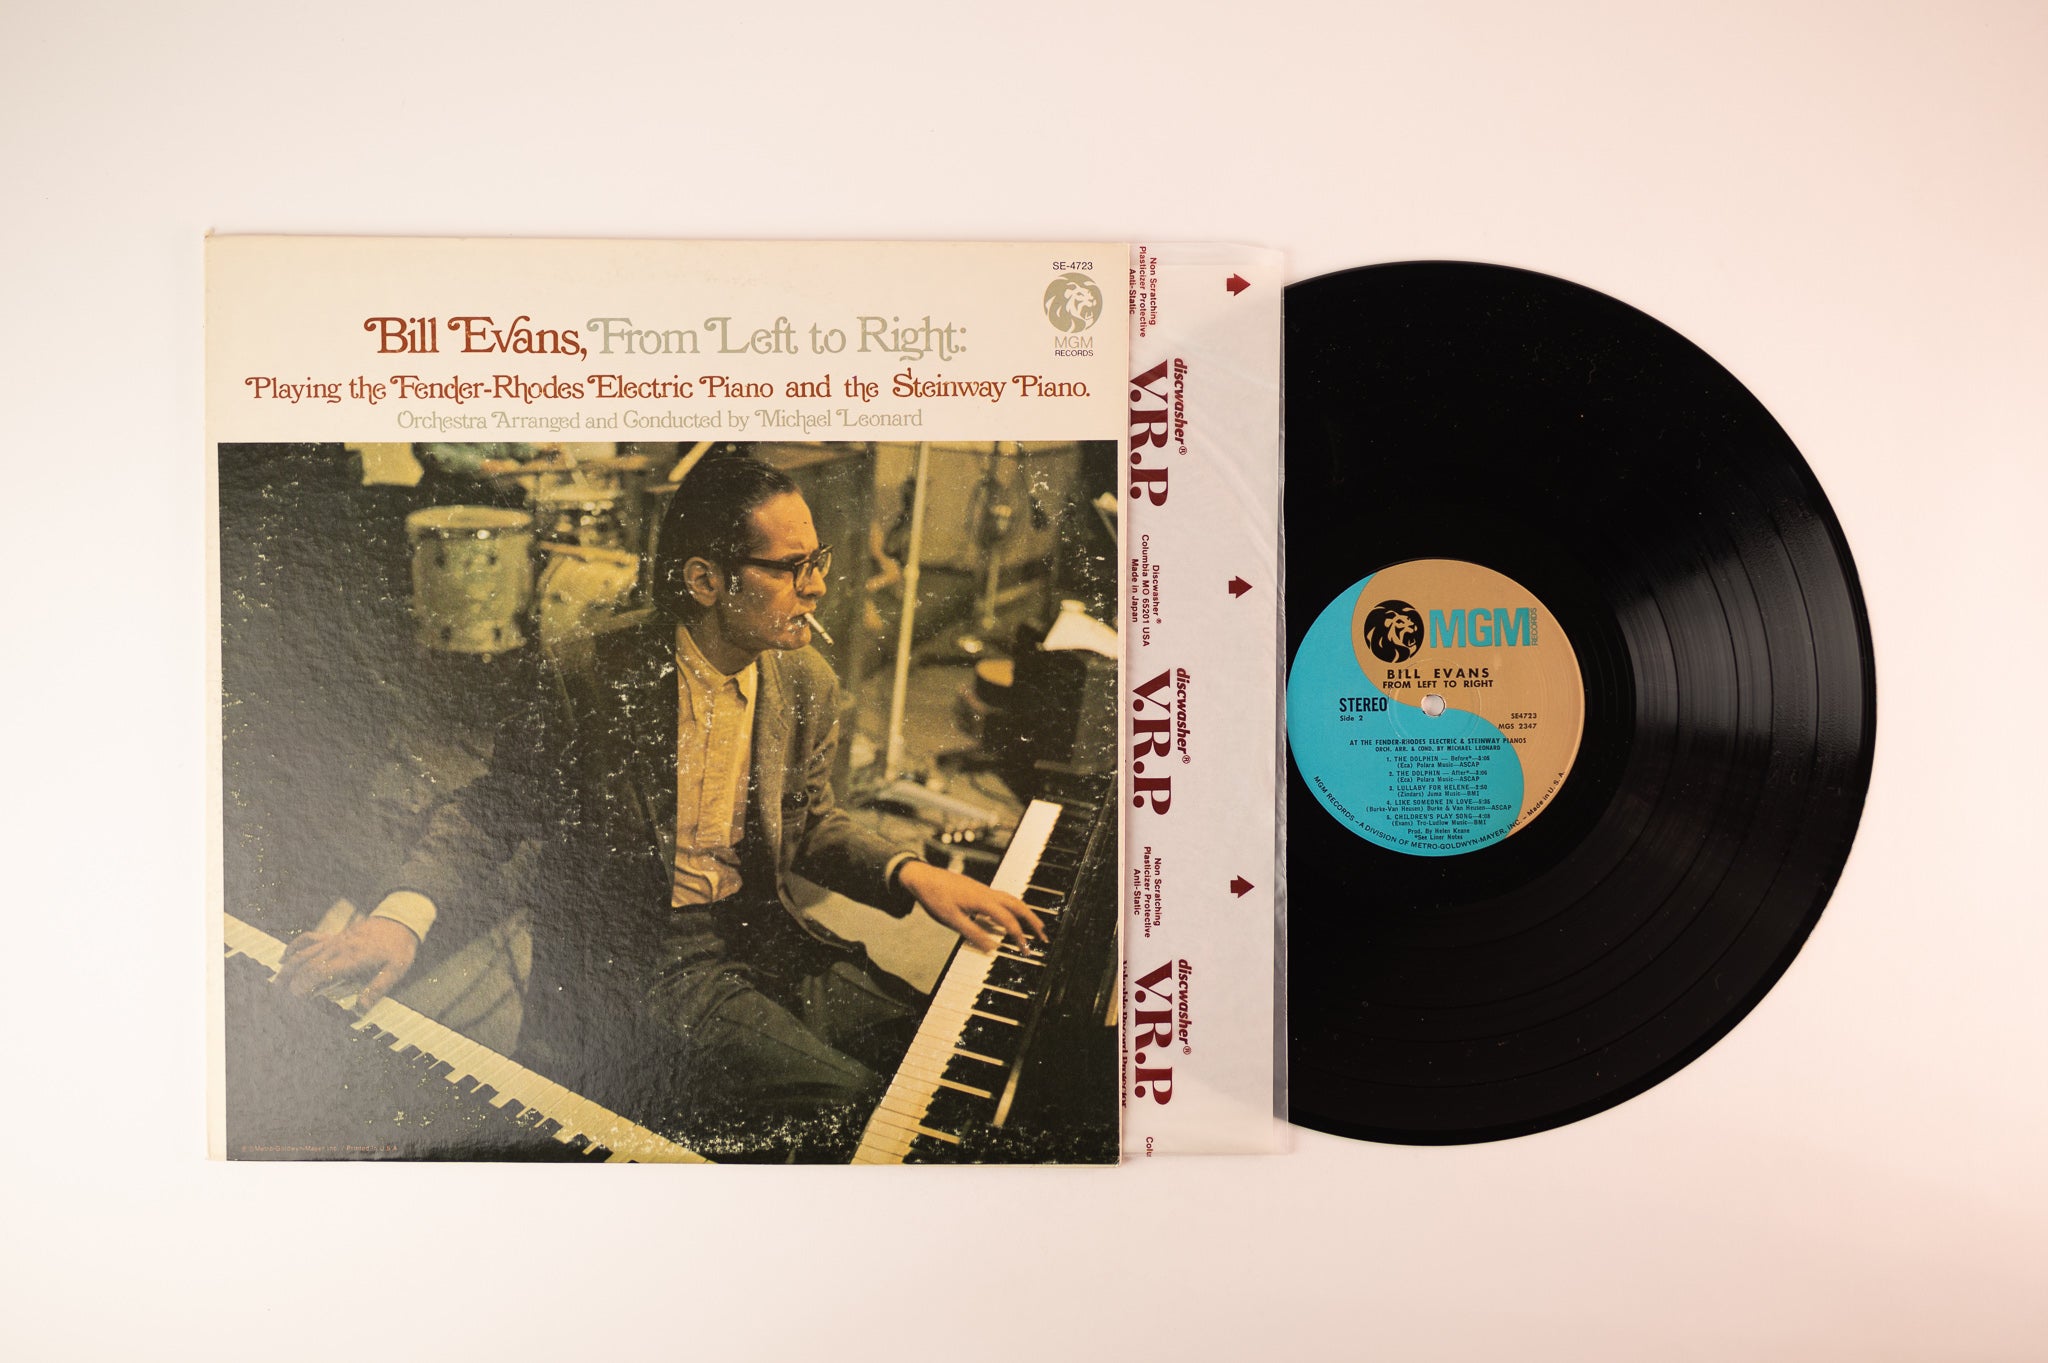 Bill Evans - From Left To Right on MGM Stereo